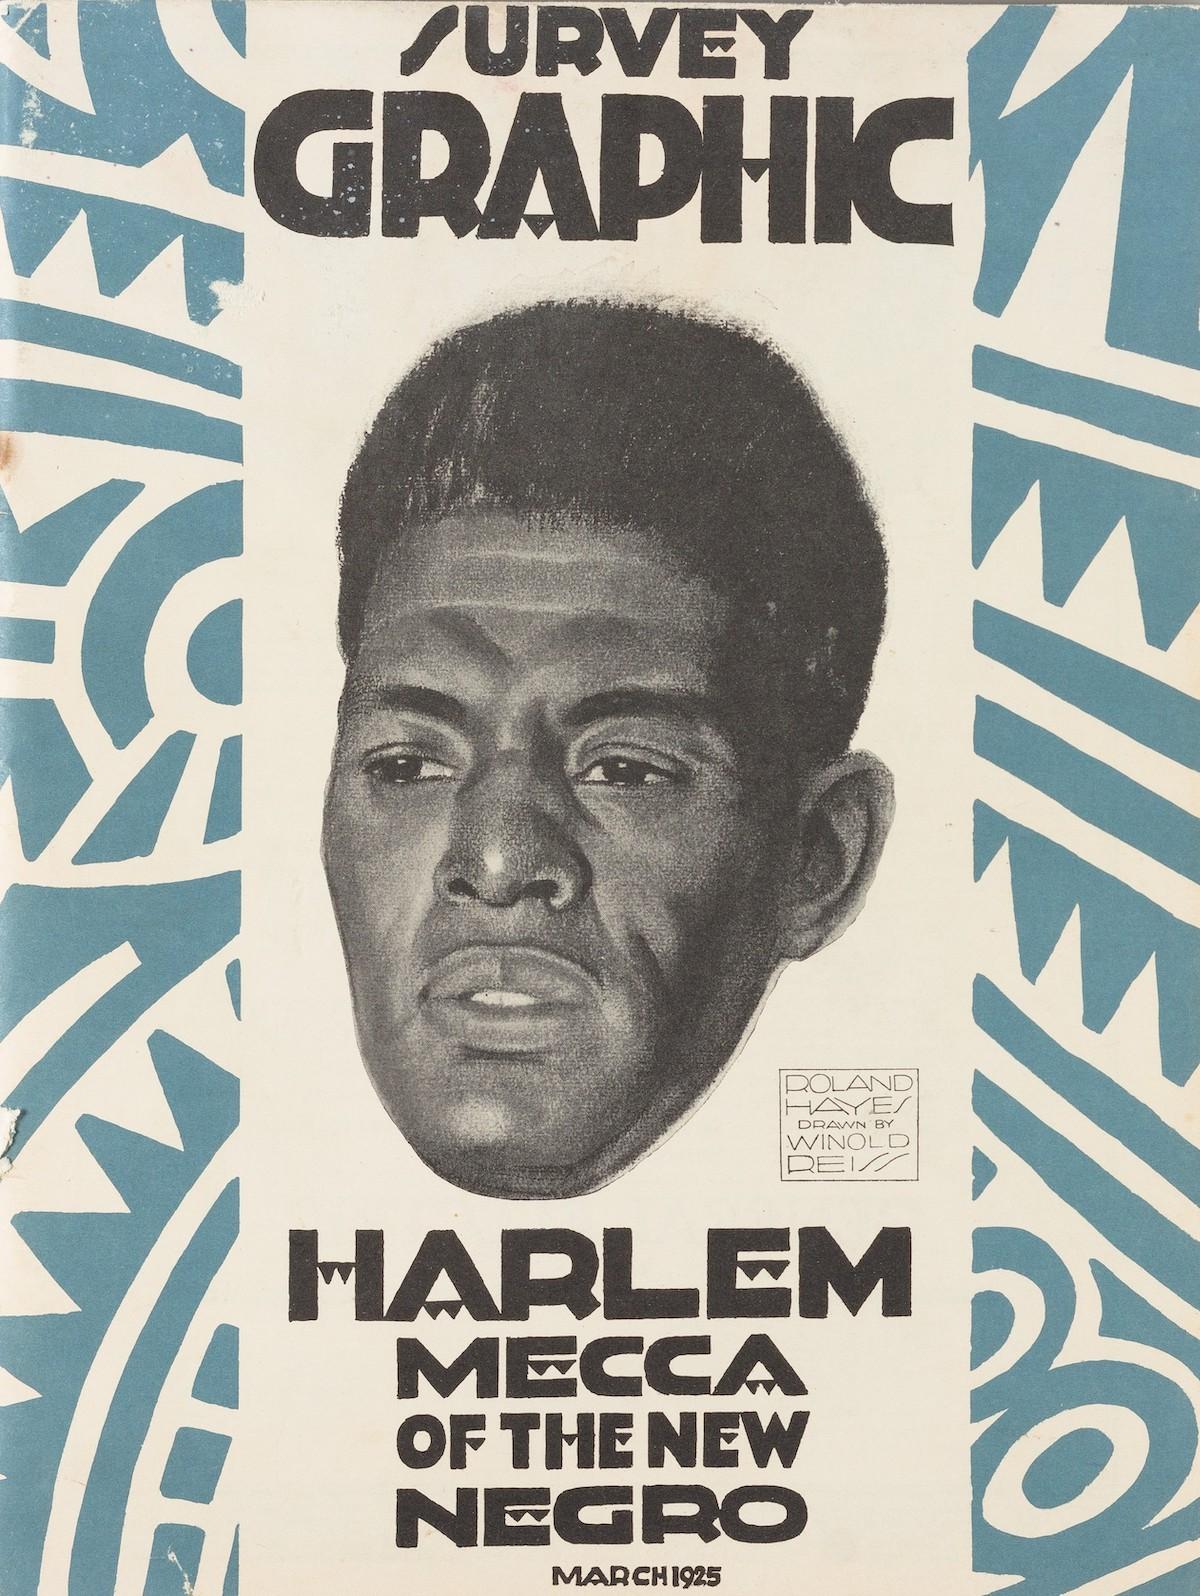 Survey Graphic. Volume LIII, No. 11, March 1, 1925. Harlem: Mecca of the new negro, 1925. 